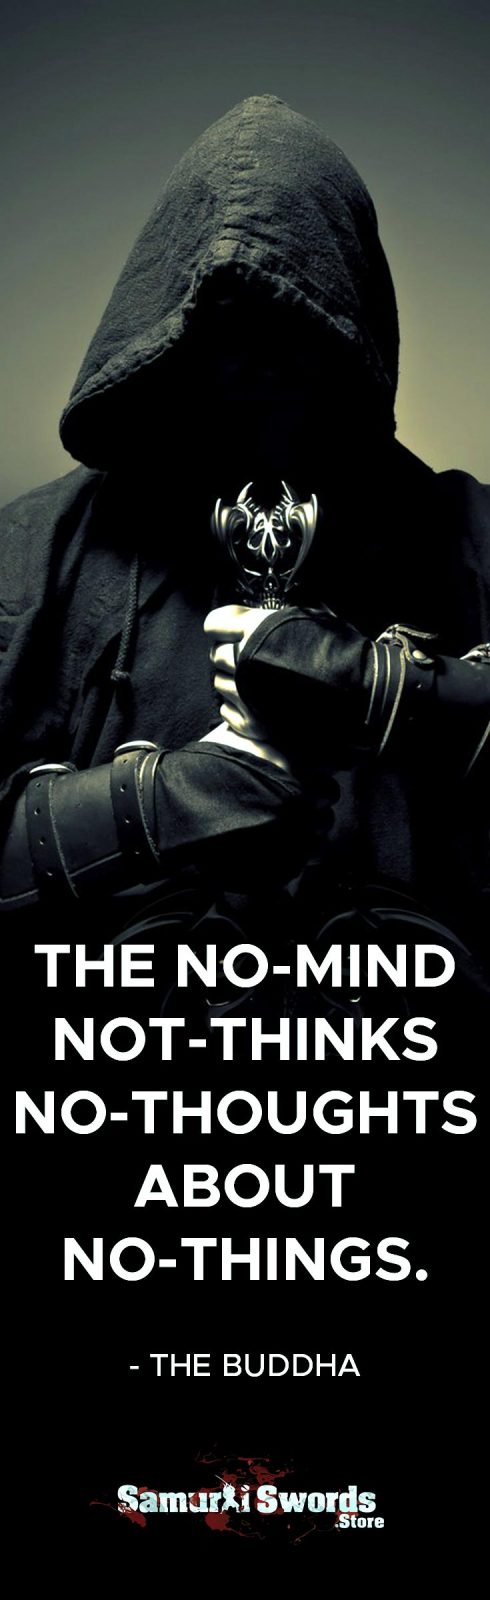 The no-mind not-thinks no-thoughts about no-things. - The Buddha